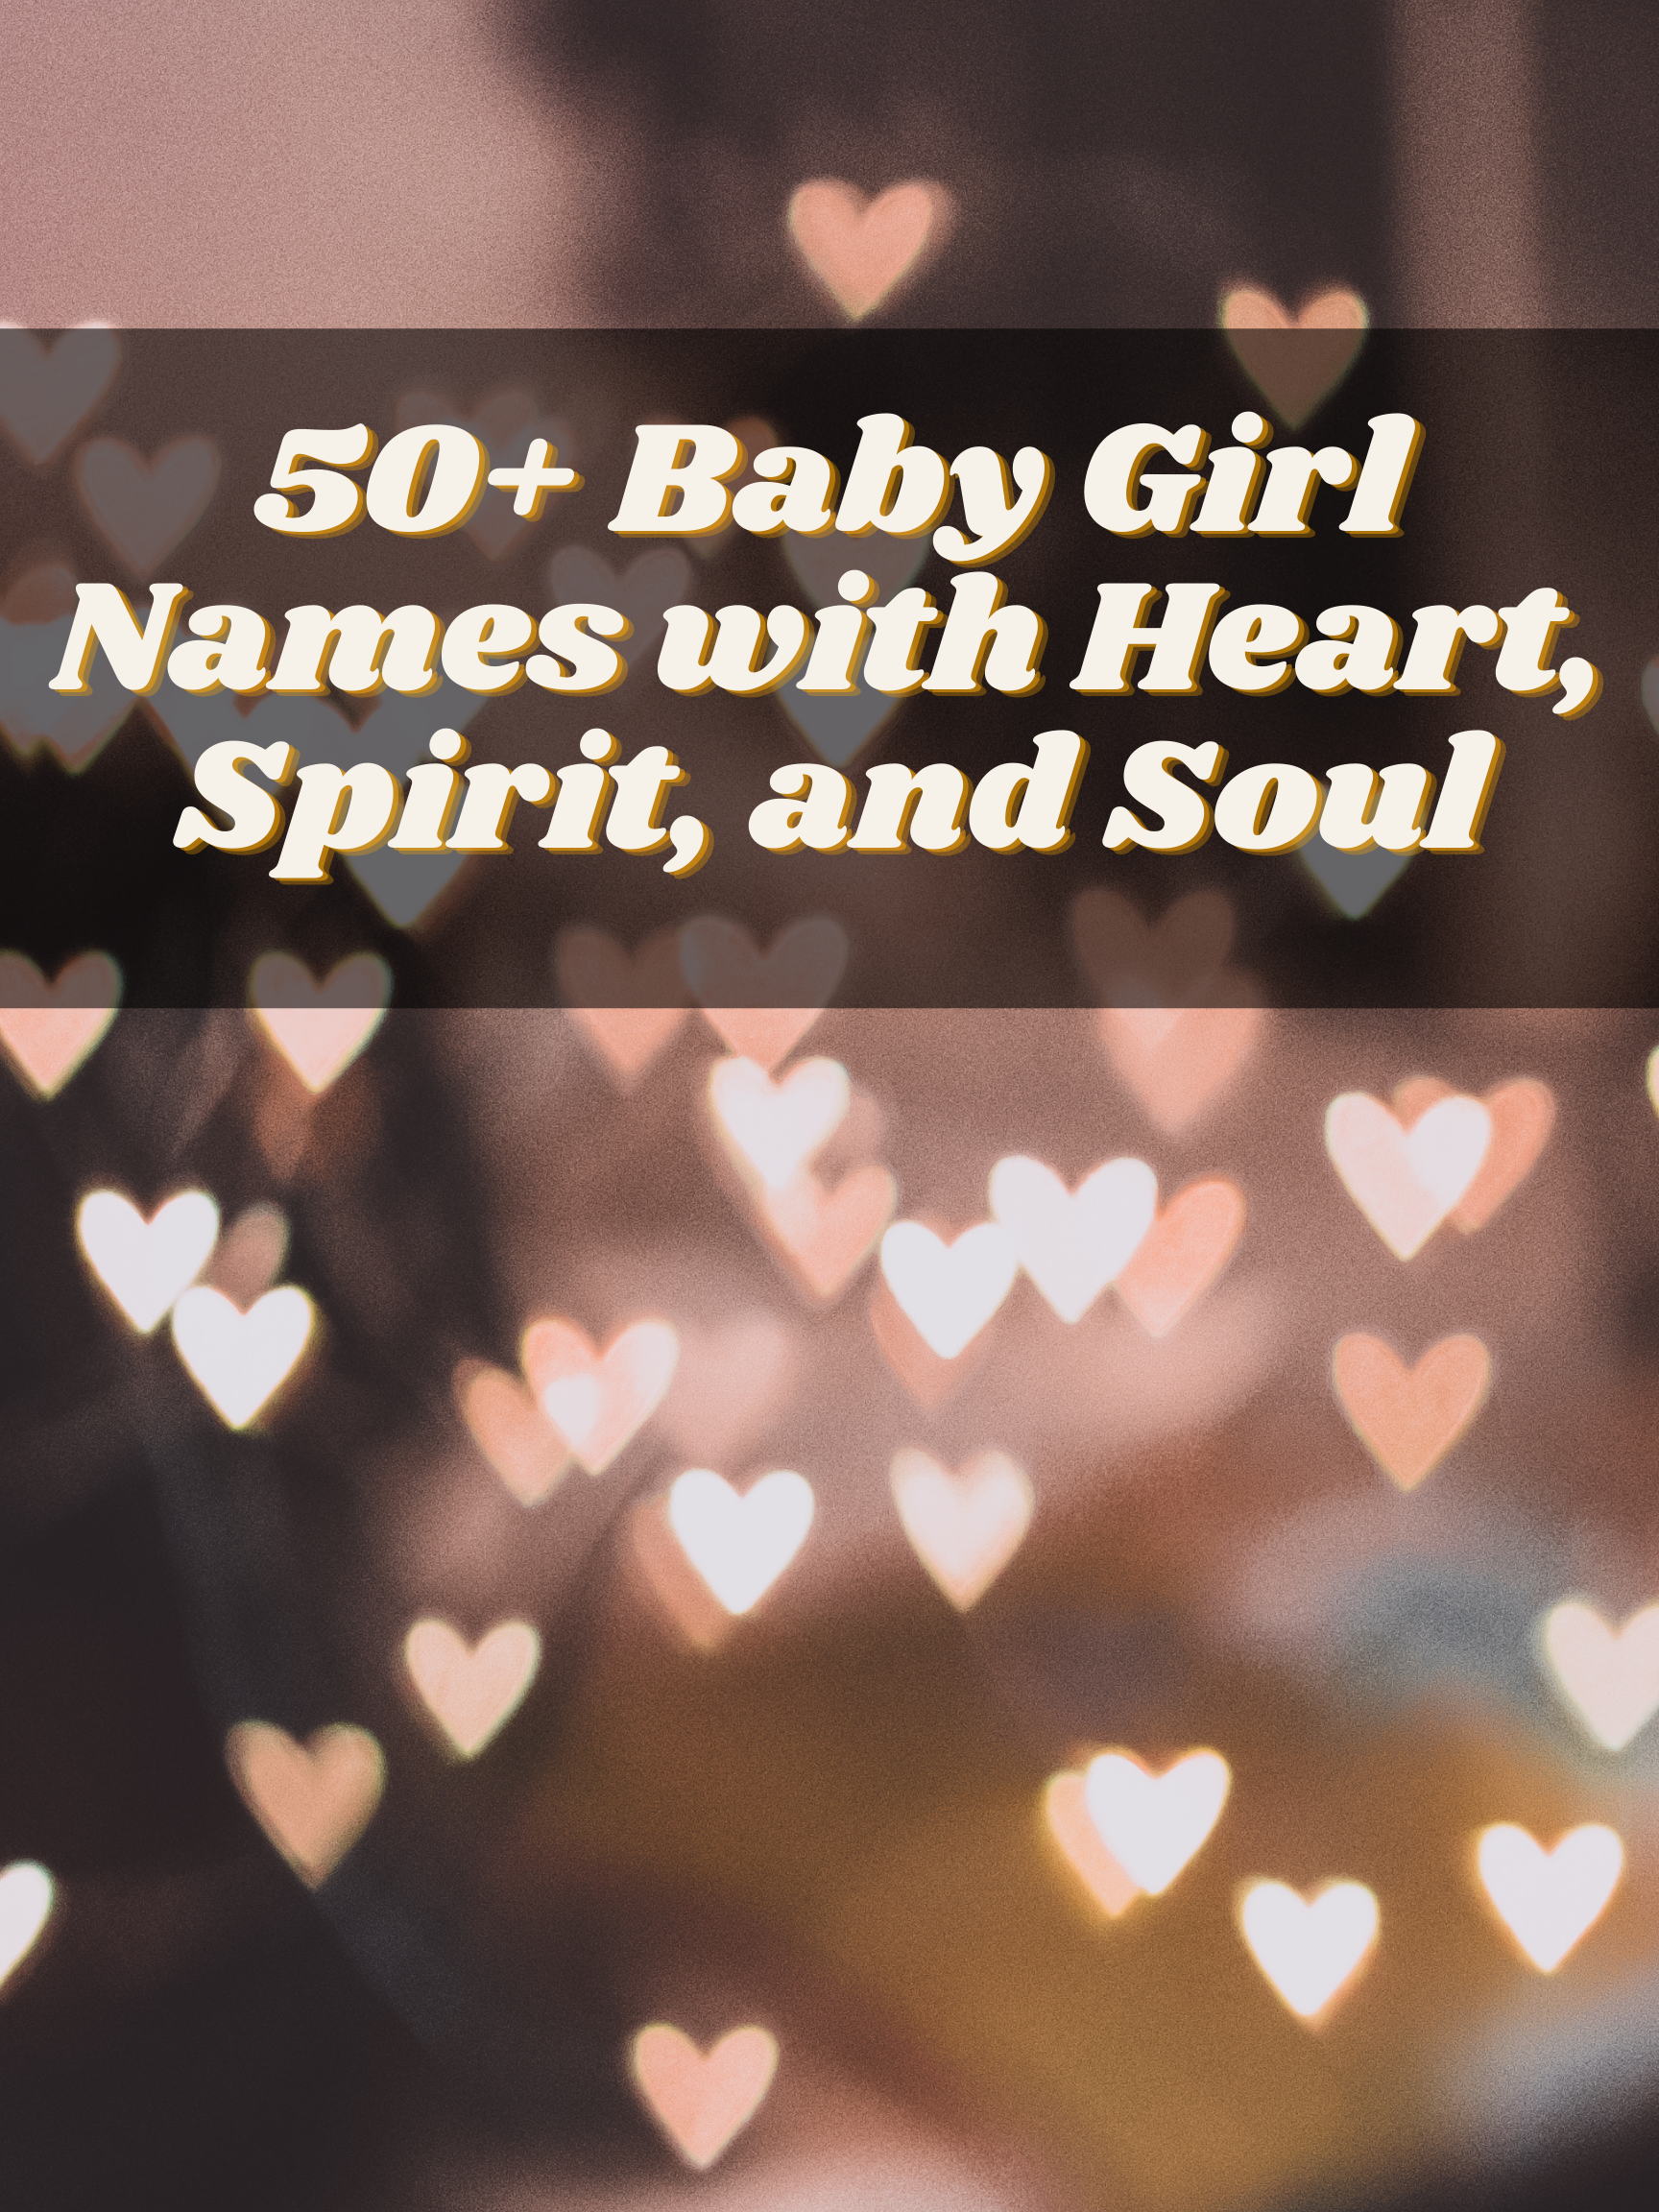 50+ Baby Girl Names with Heart, Spirit, and Soul